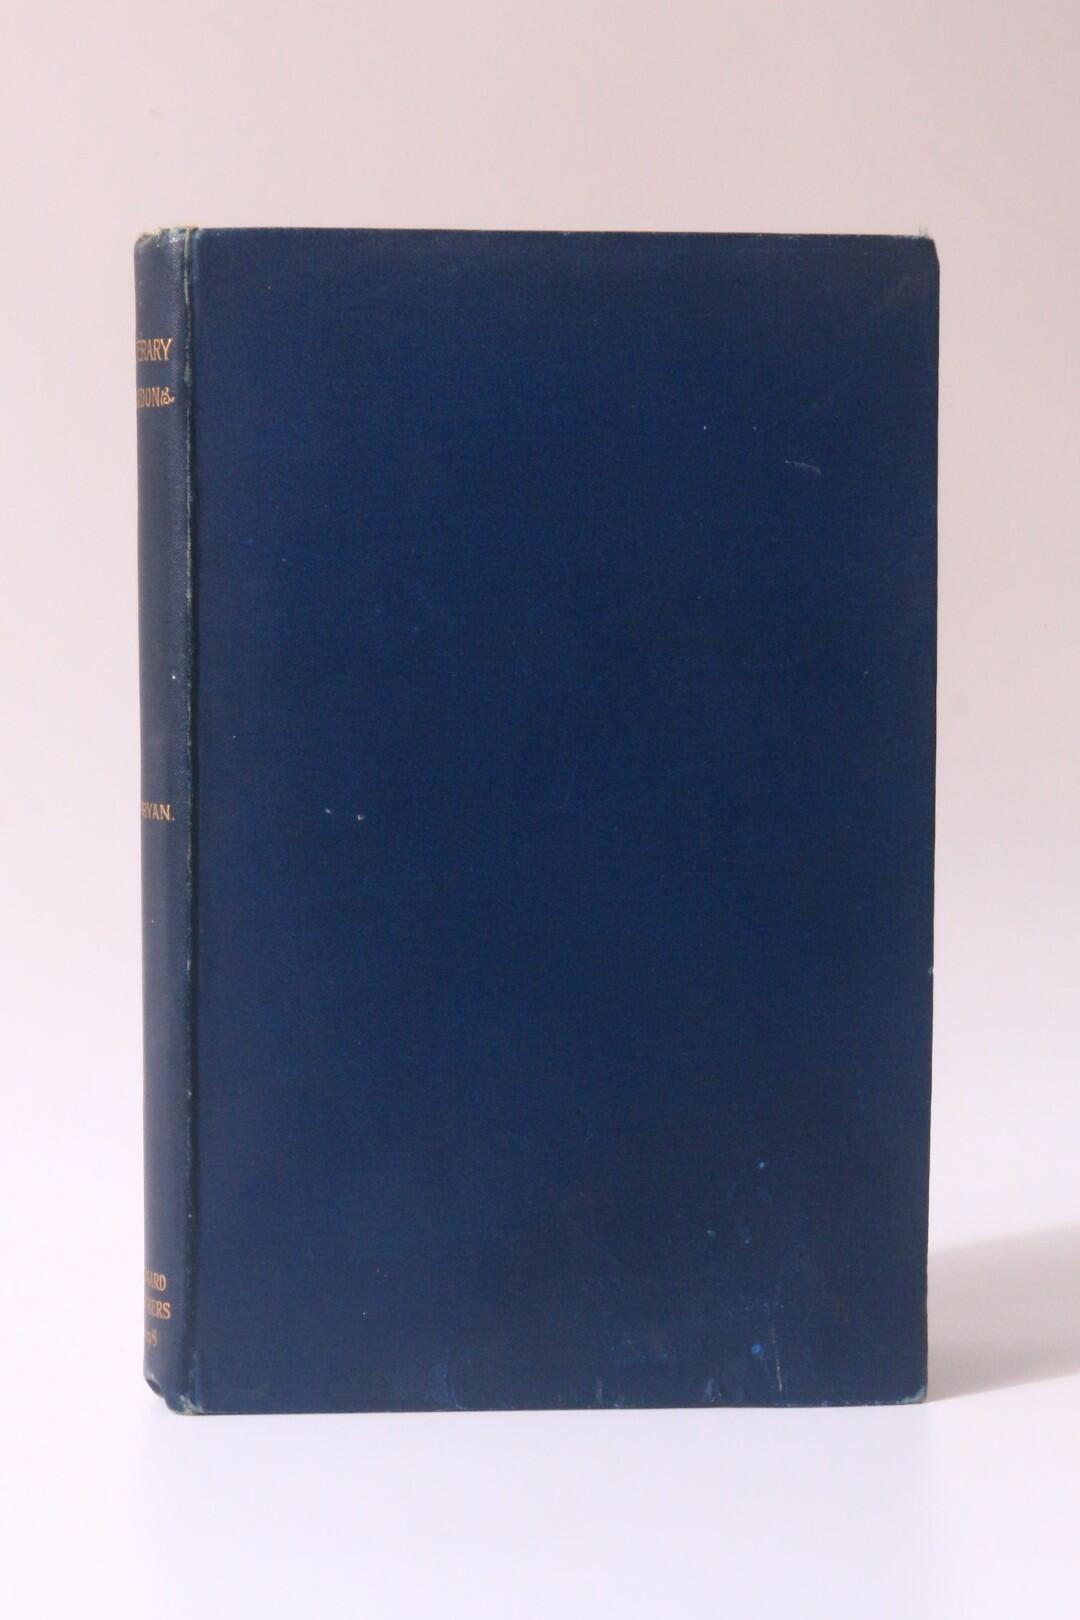 W.P. Ryan - Literary London: Its Lights and Comedies - Smithers [but the author], 1898, First Edition.